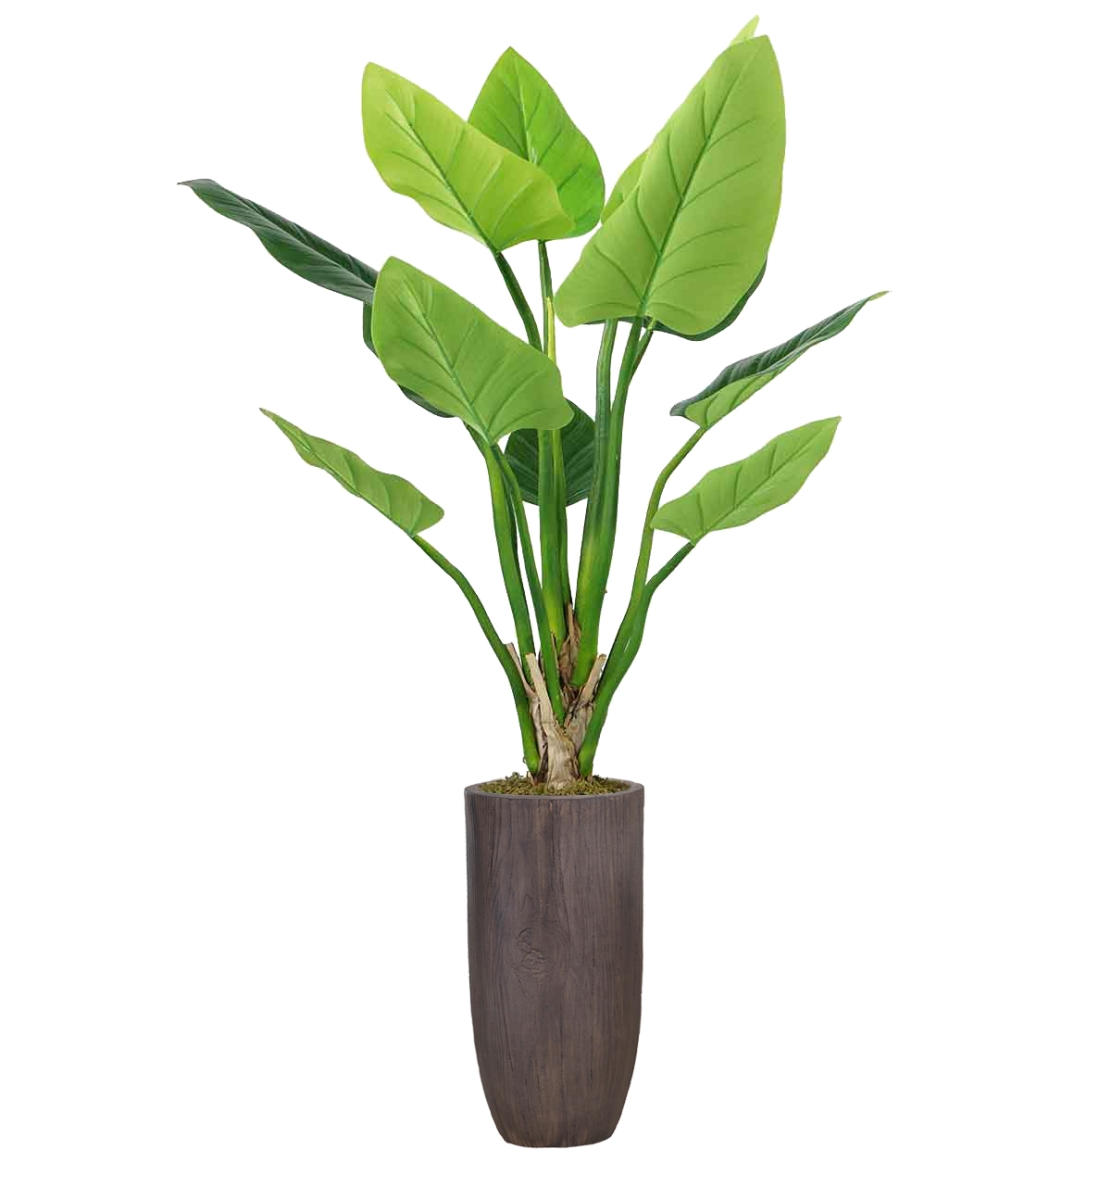 Vhx136224 62.25 In. Philodendron Erubescens Green Emerald Plant In Resin Planter